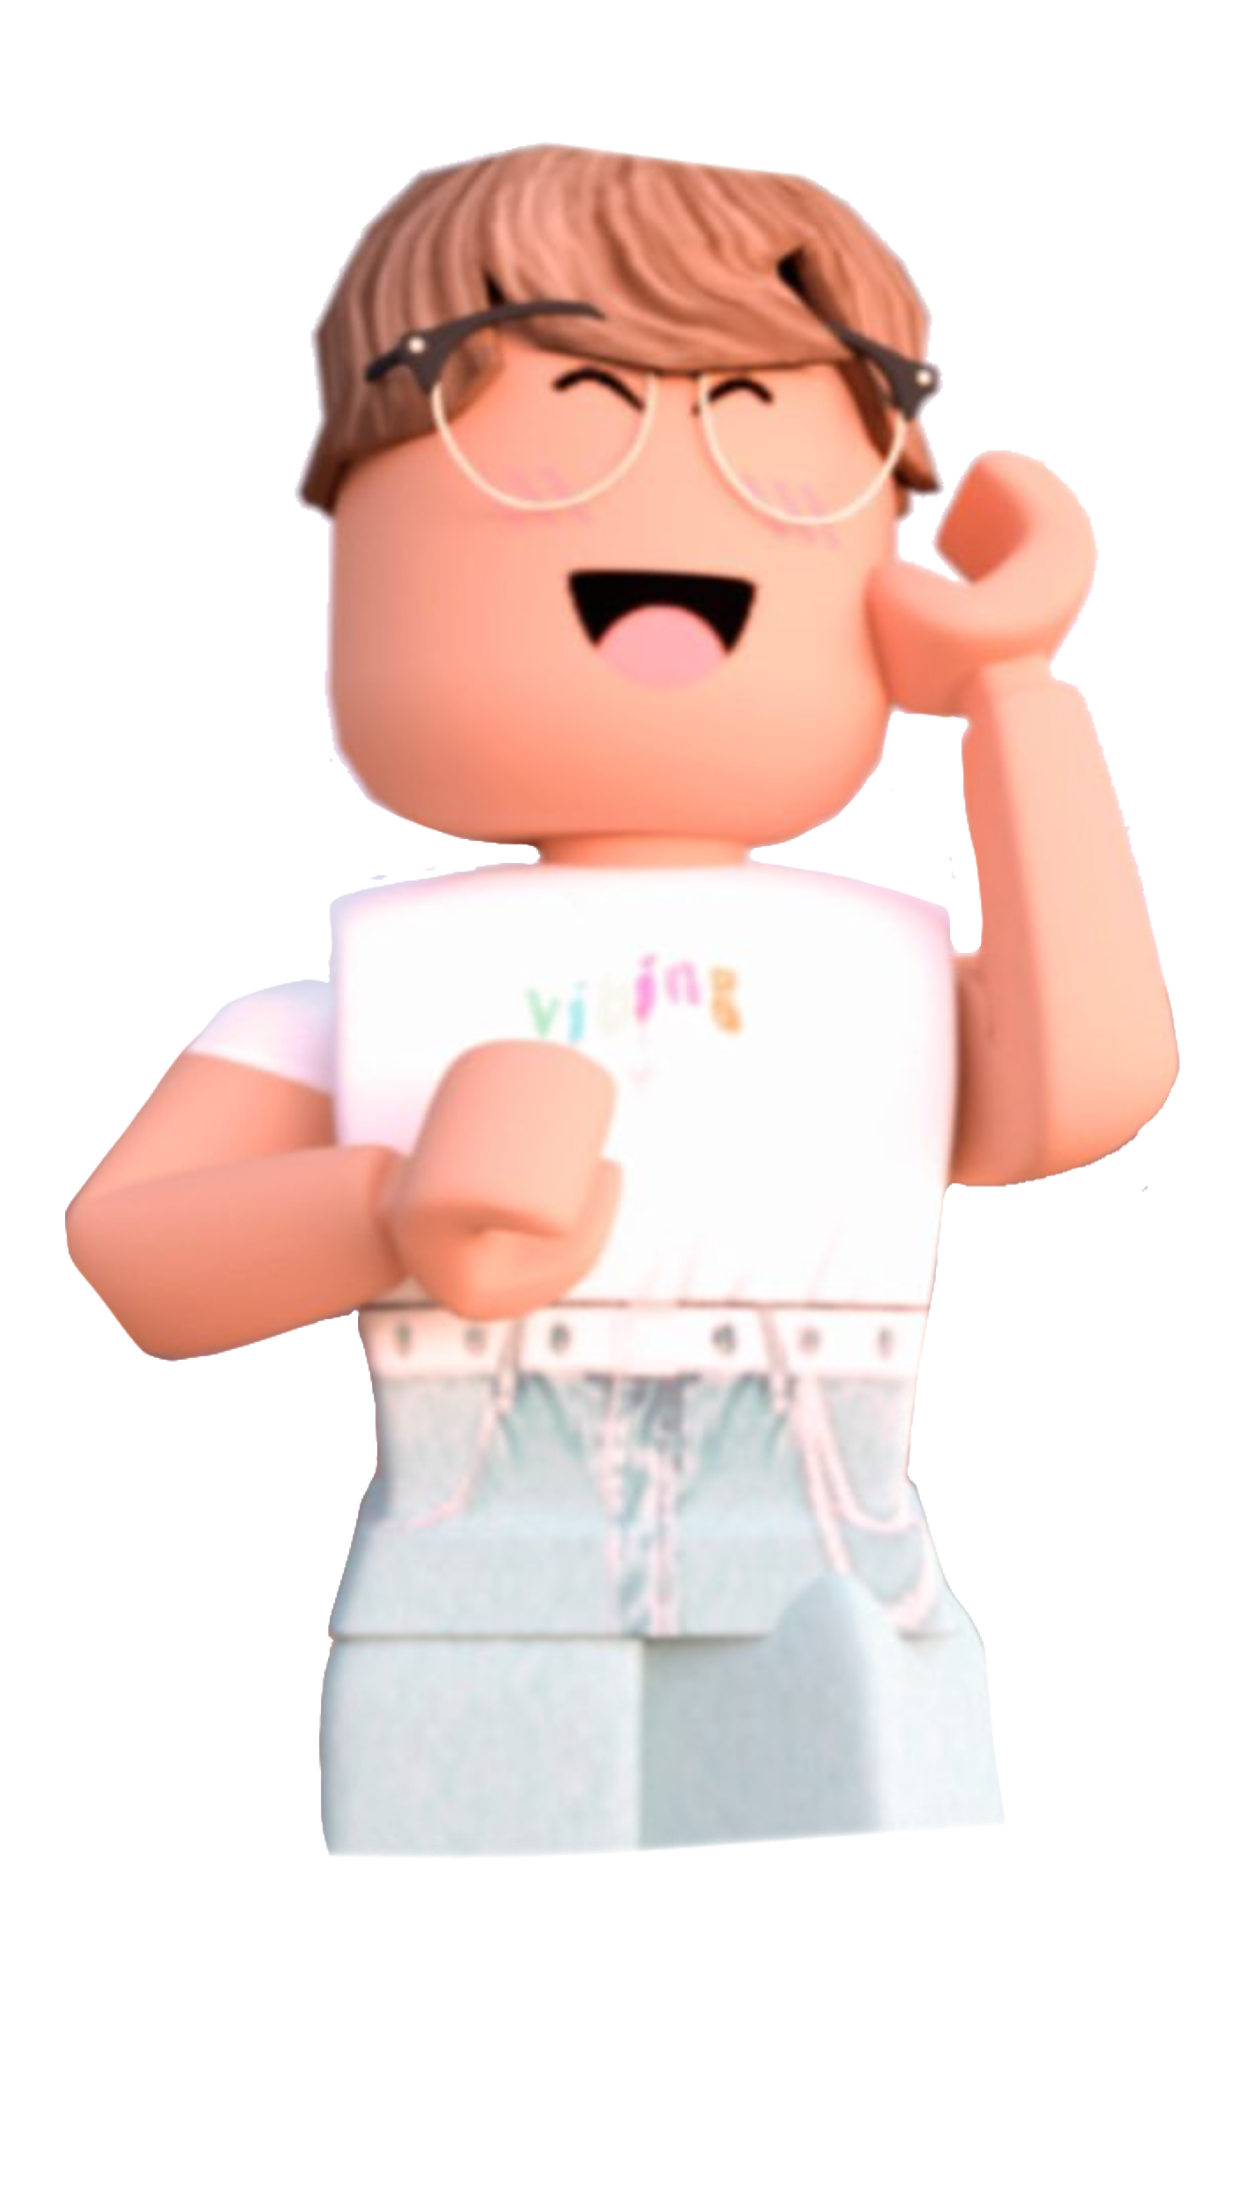 Robloxgfx Robloxedit Sticker By Carylya - supreme boy gfx roblox robloxgfx sticker by leah